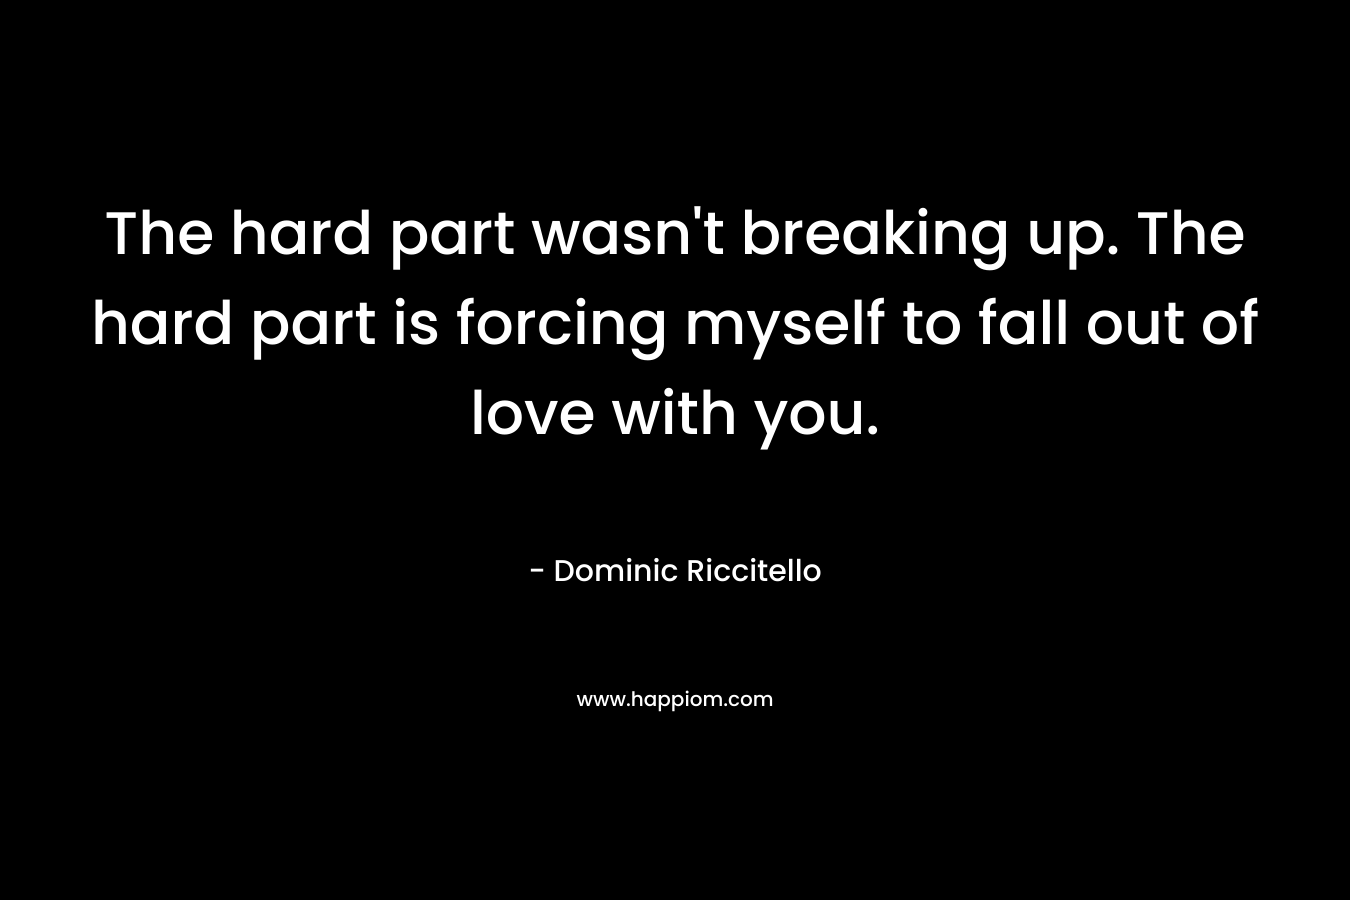 The hard part wasn't breaking up. The hard part is forcing myself to fall out of love with you.